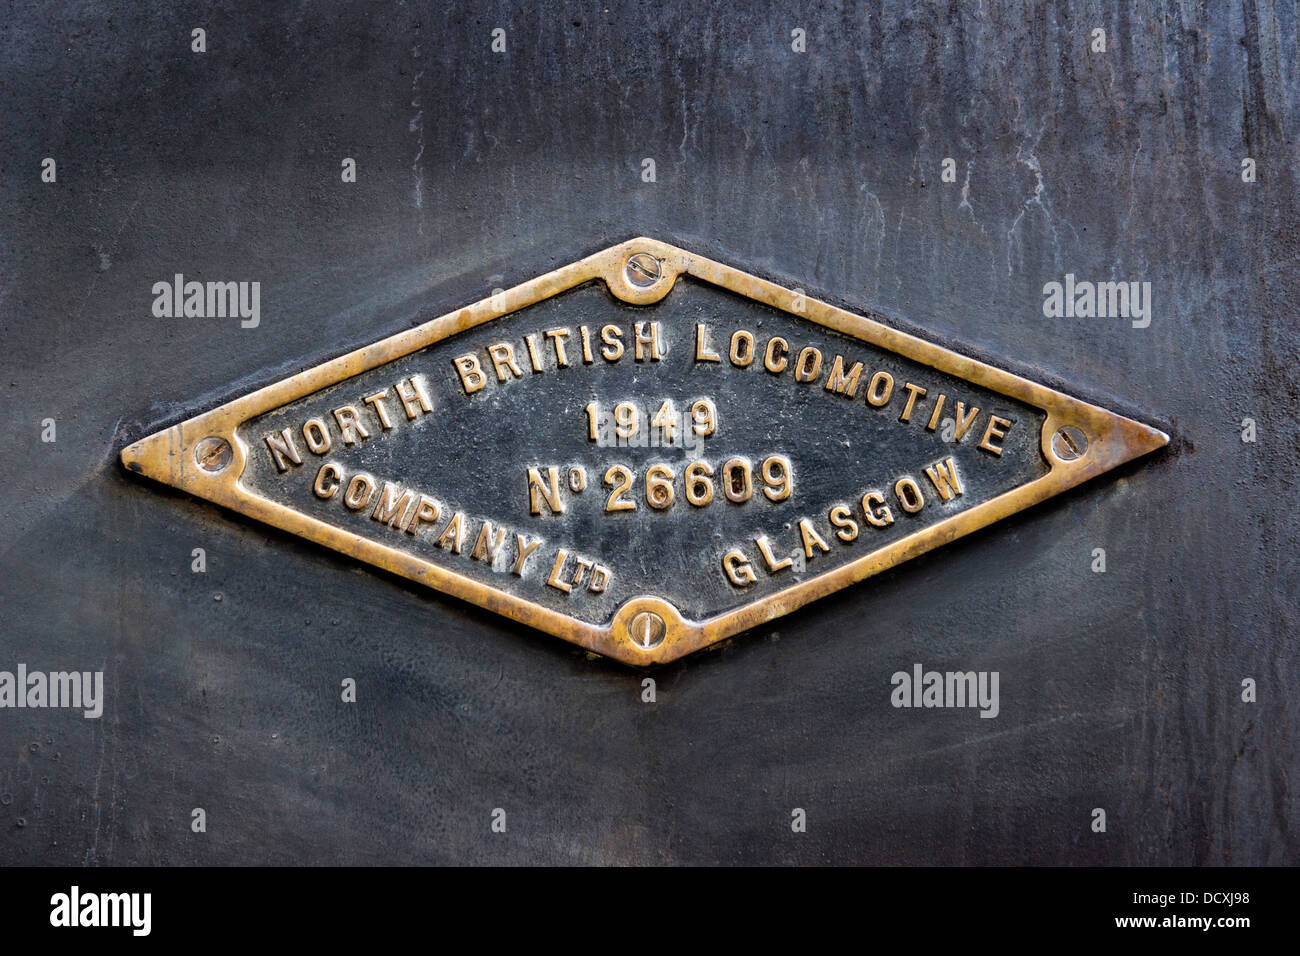 The Jacobite Steam Train Locomotive Number Plate Stock Photo